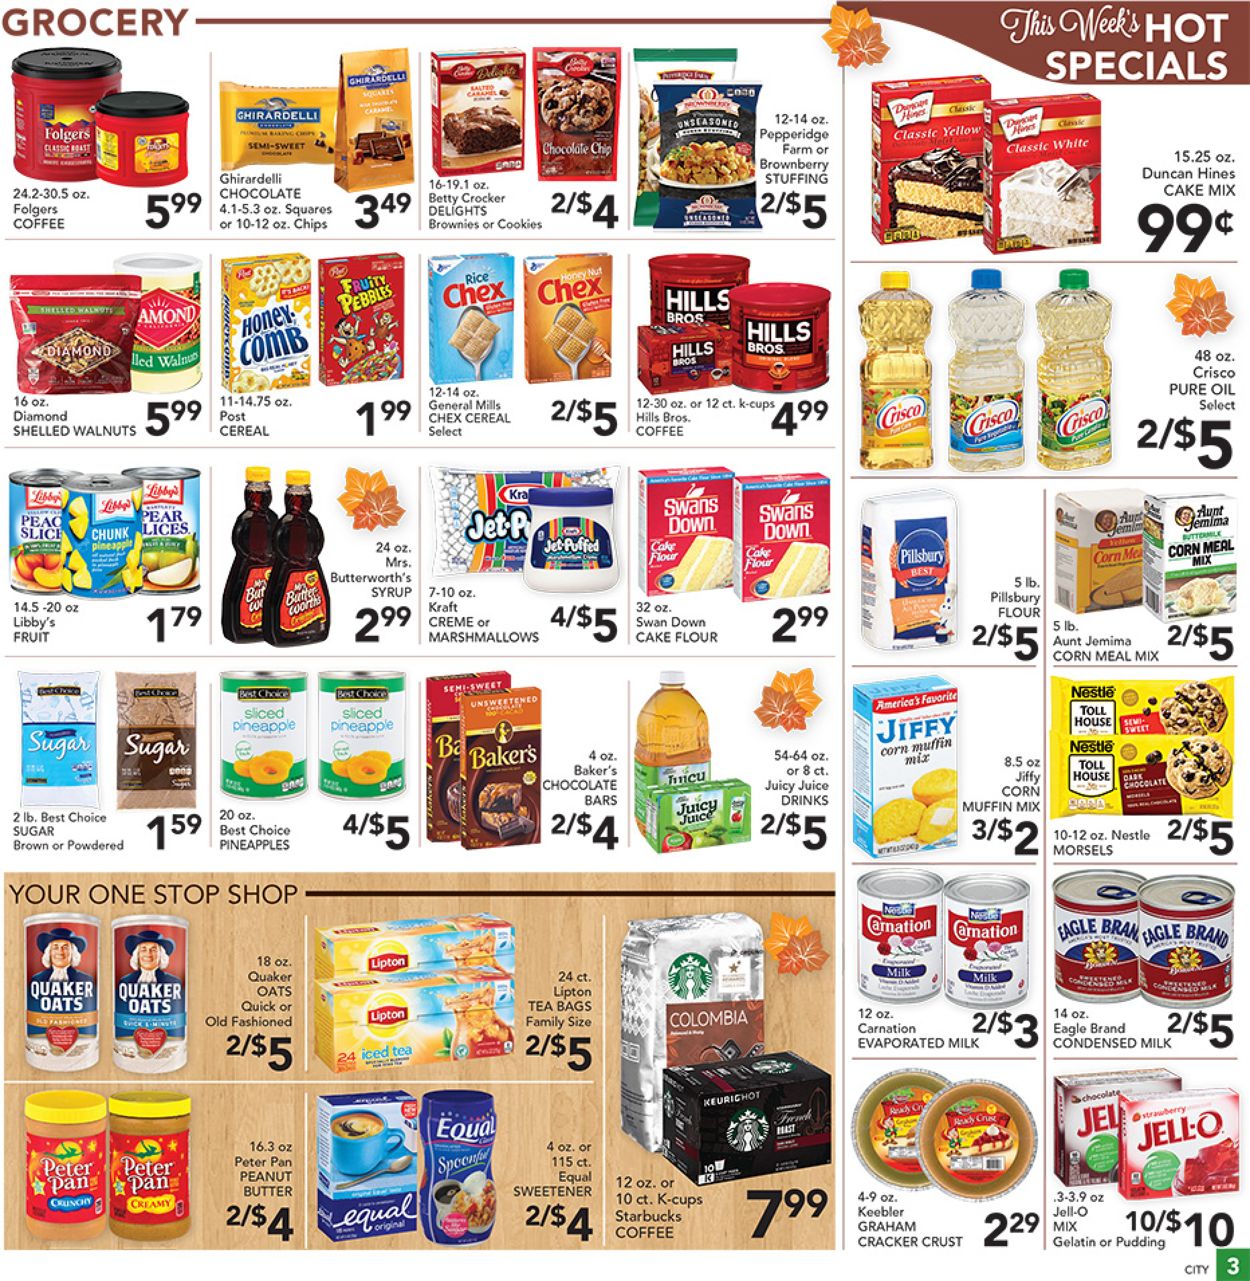 Pete's Fresh Market Thanksgiving ad 2020 Weekly Ad Circular - valid 11/18-11/26/2020 (Page 3)